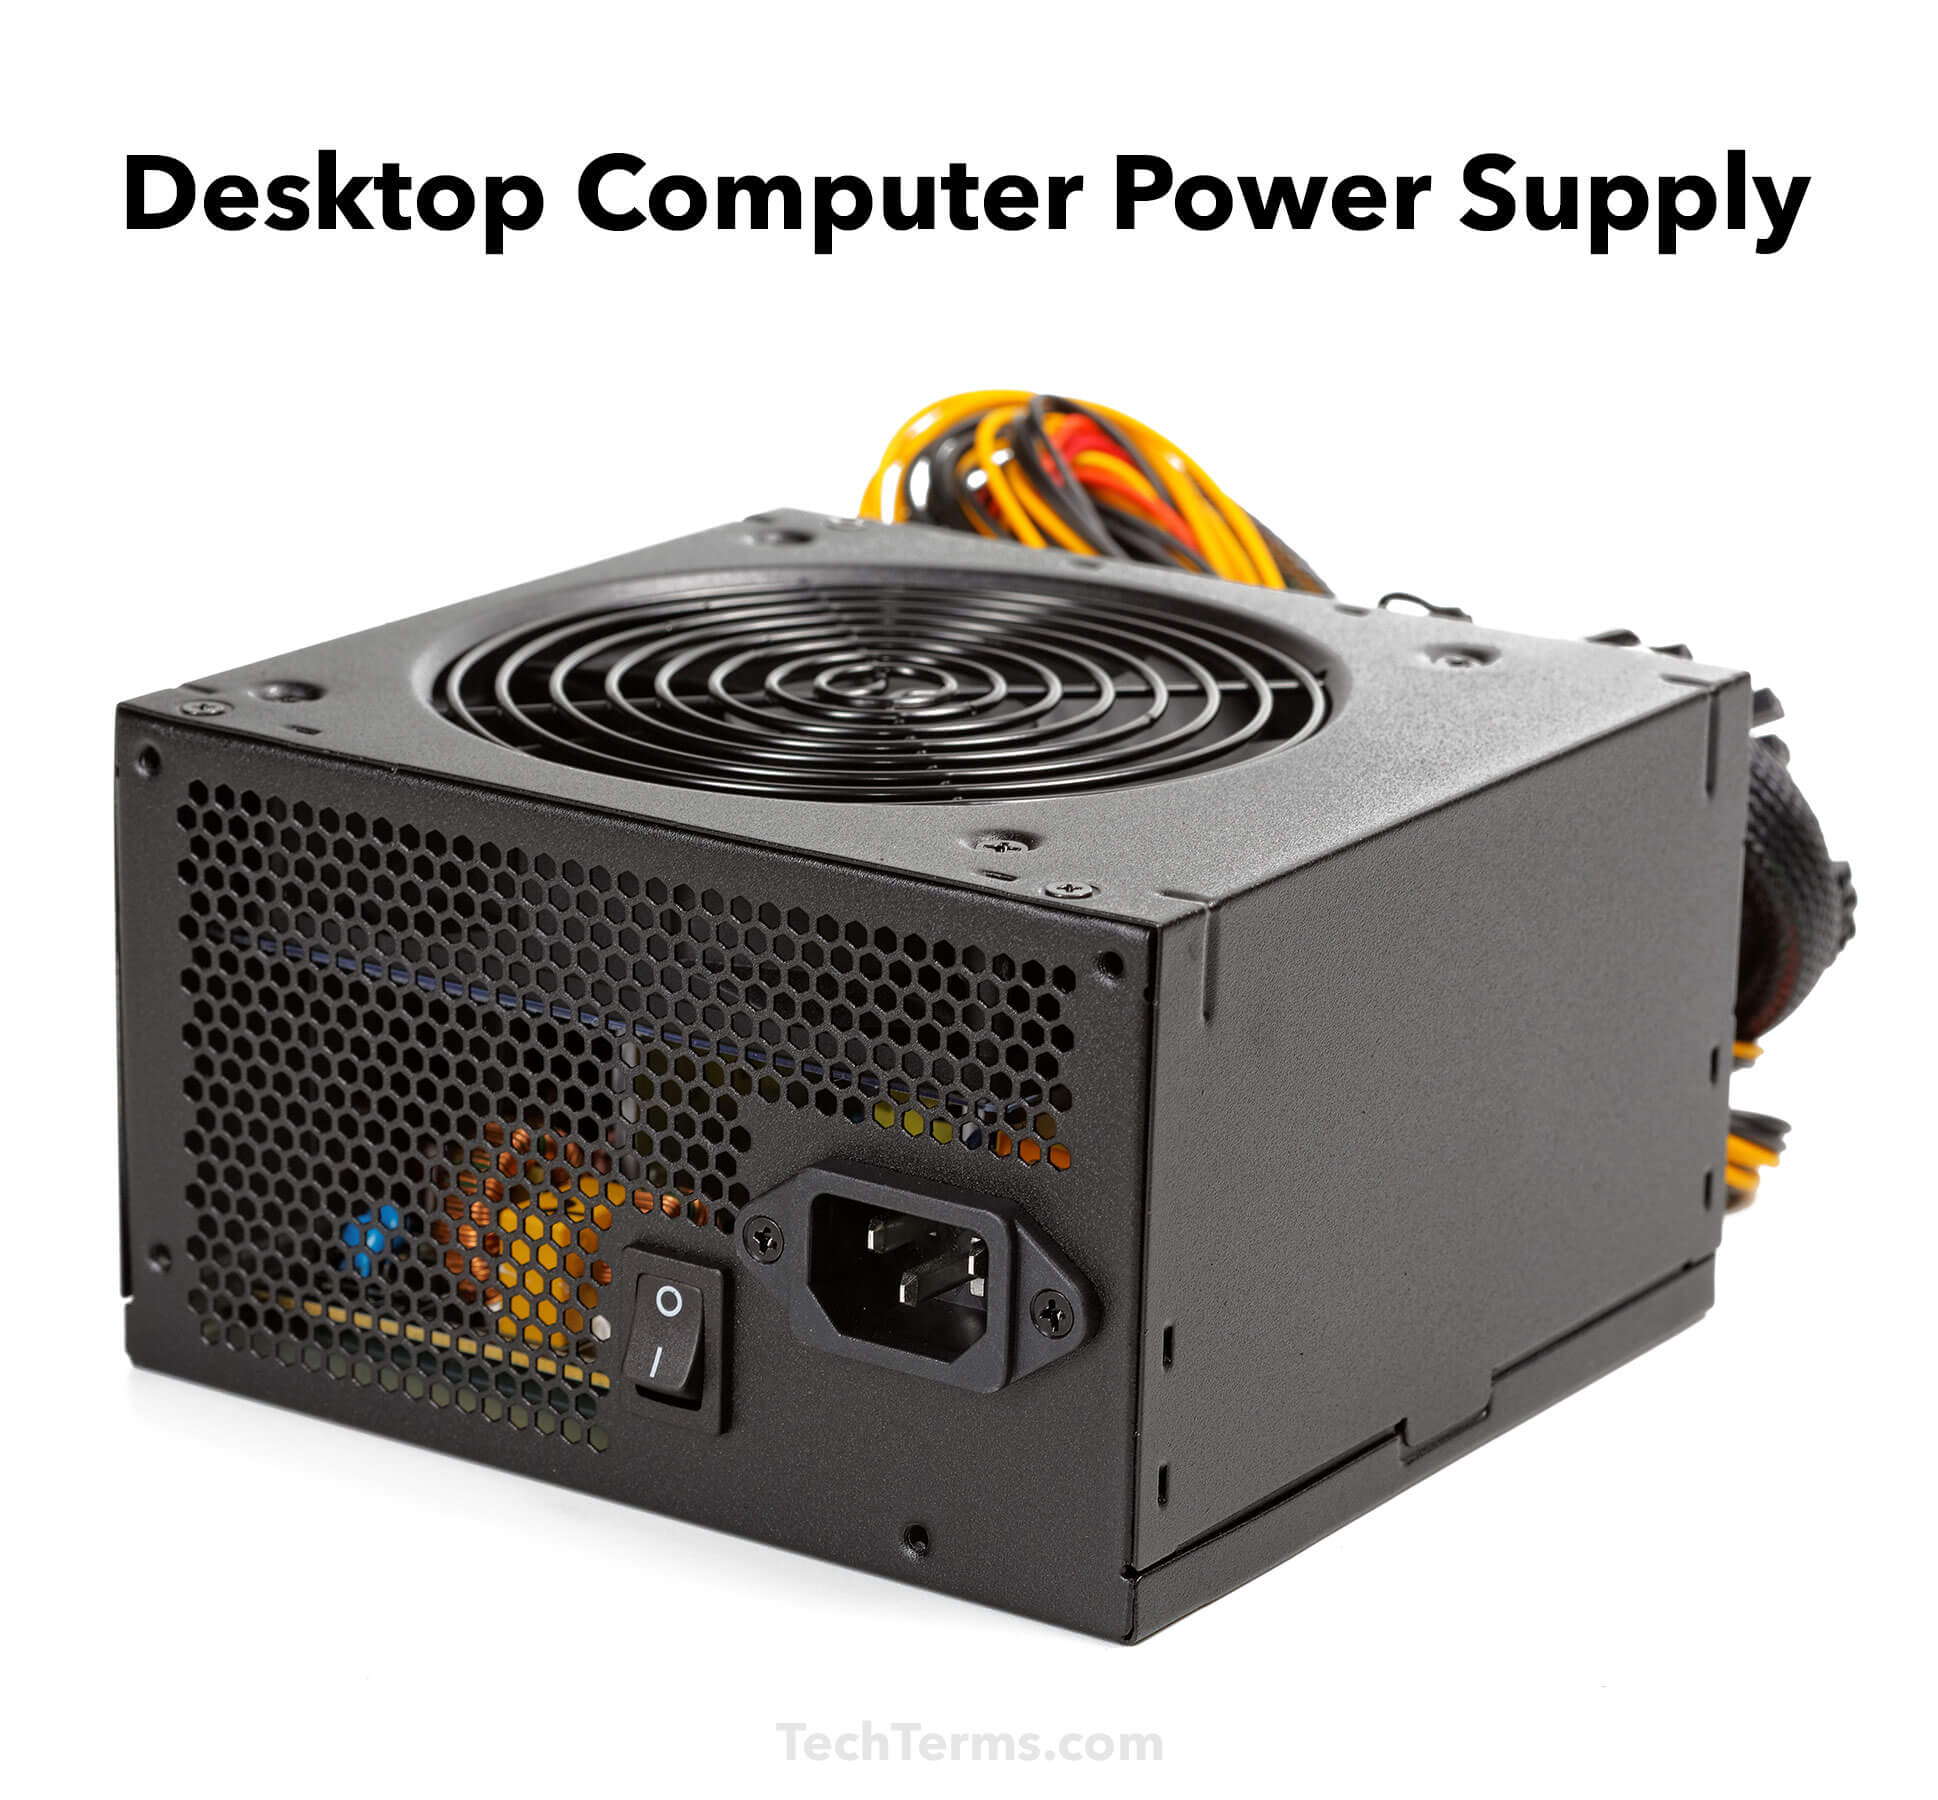 Power Supply Definition - What is a power supply?